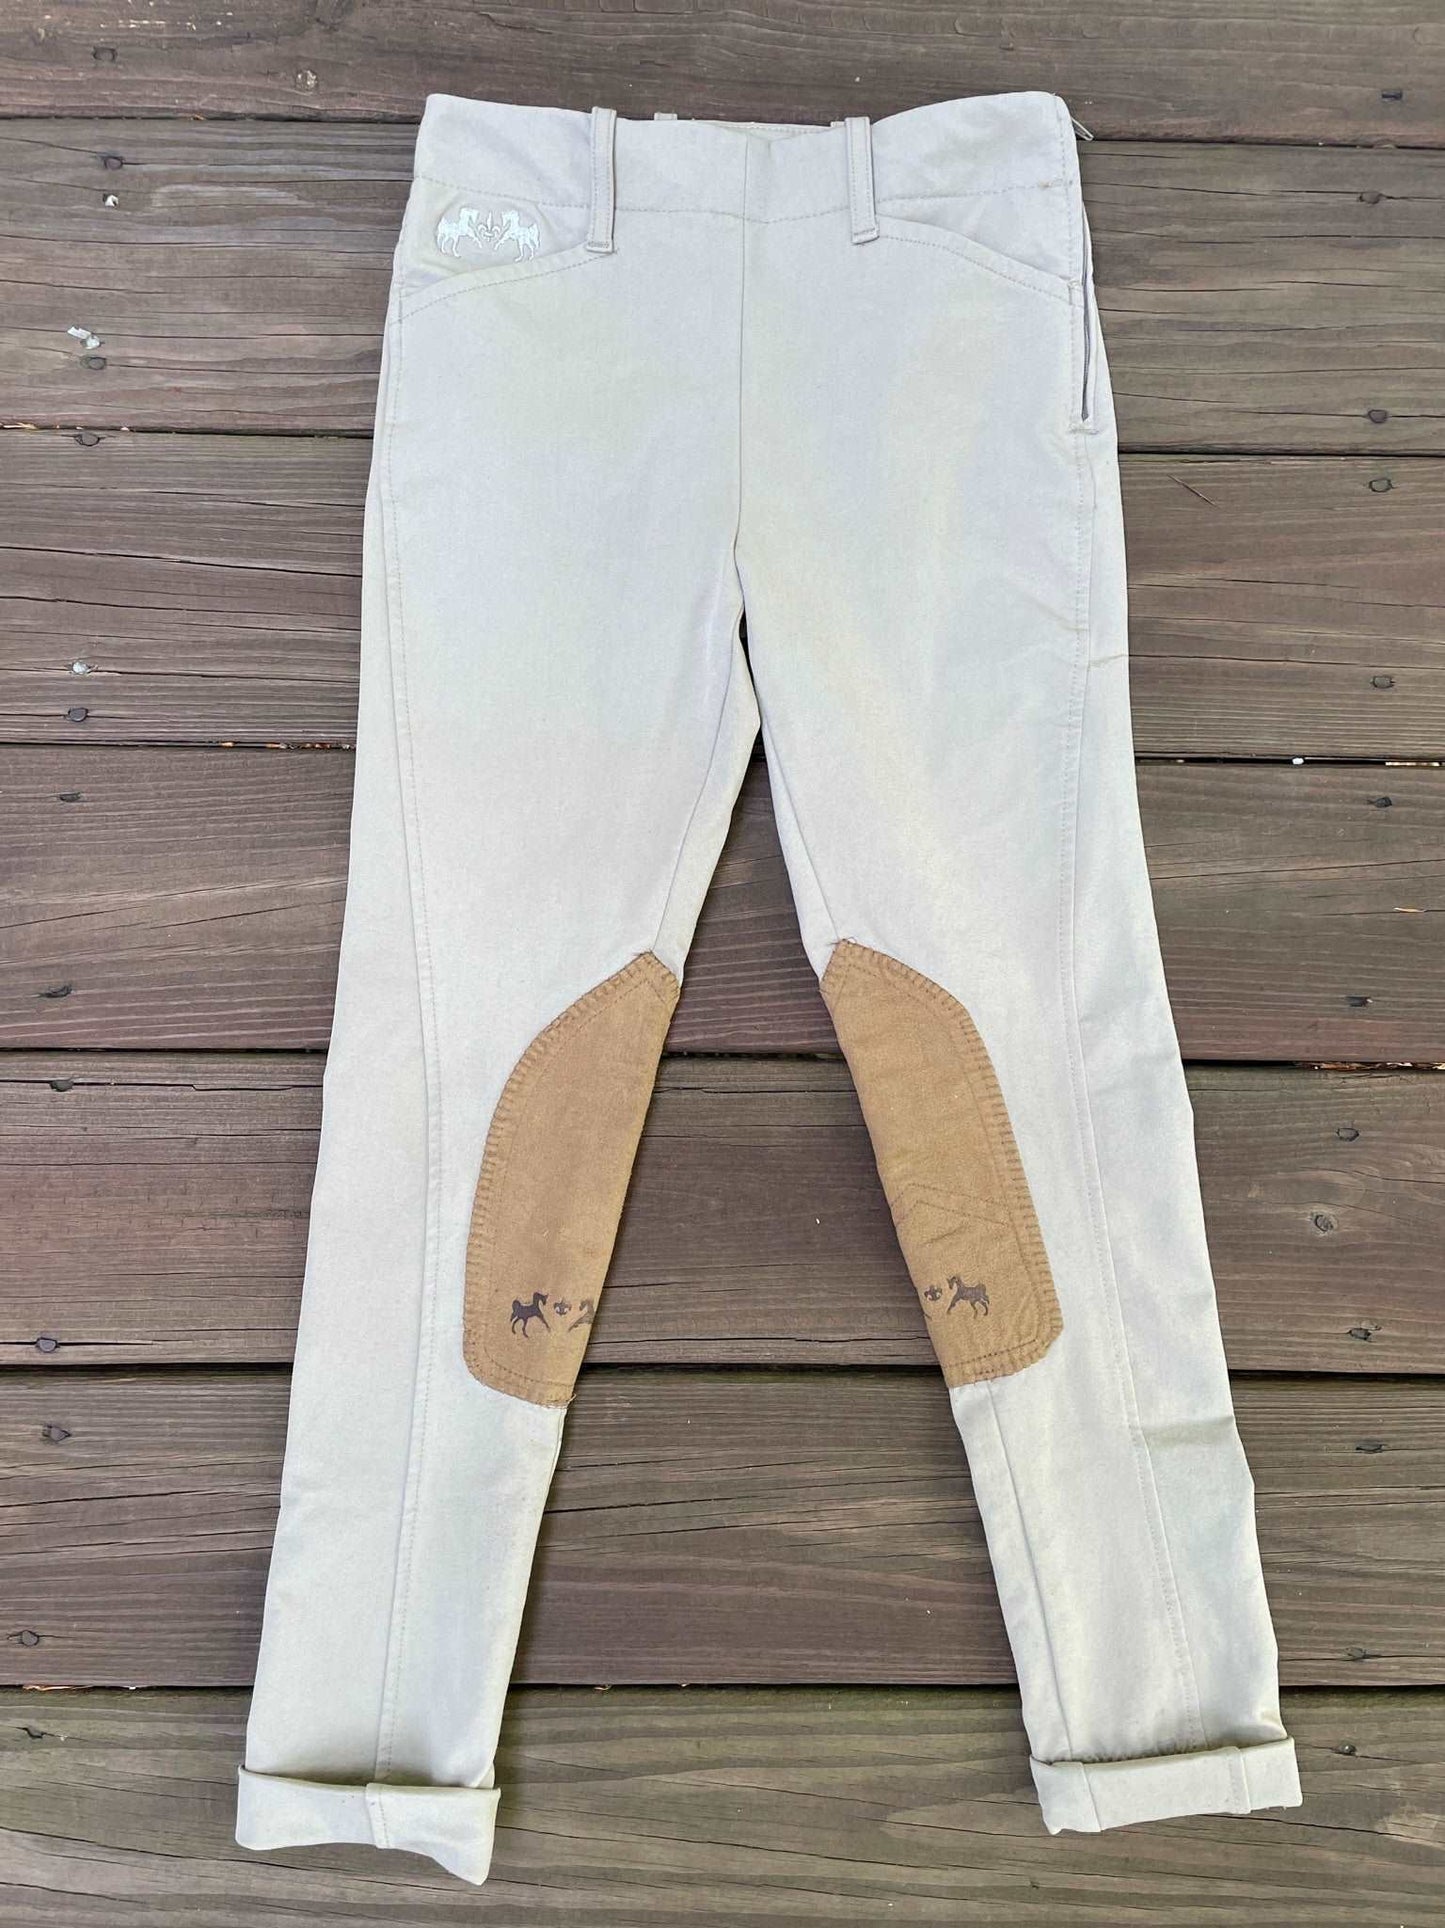 ThriftedEquestrian Clothing Youth 10 Equine Couture Jodhpurs - Youth 10